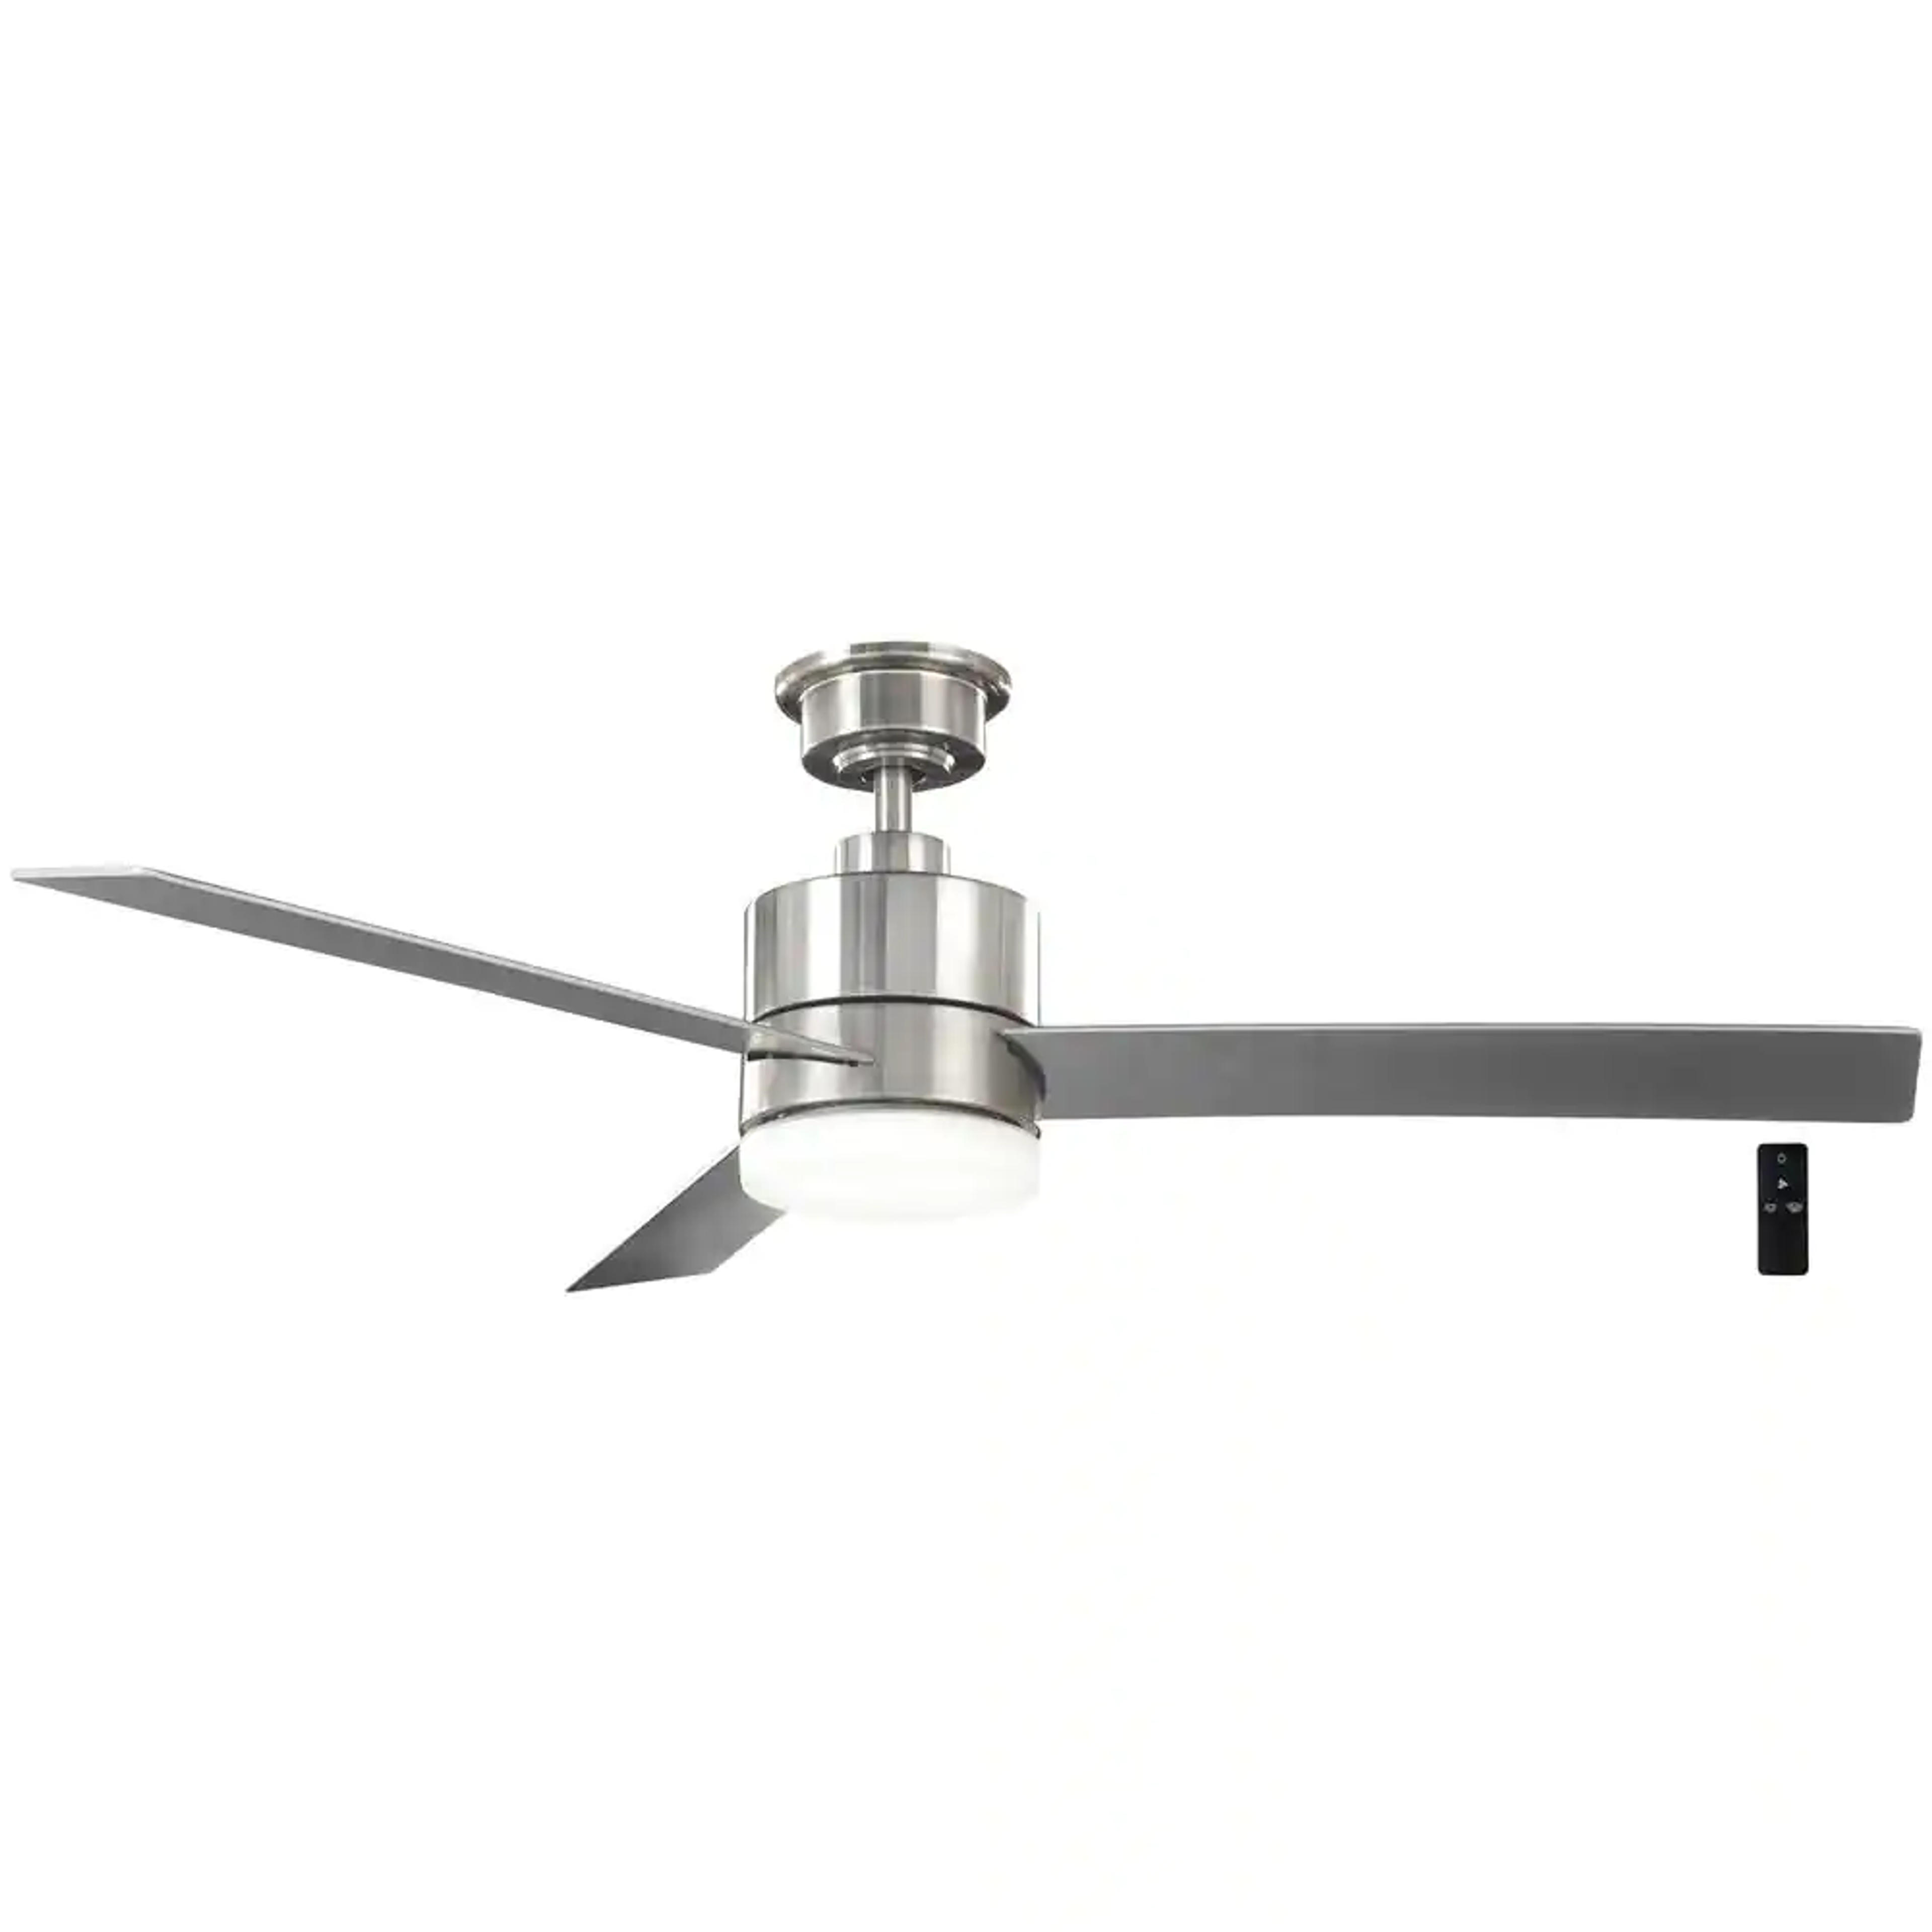 Hampton Bay Madison 52 in. Integrated LED Brushed Nickel Ceiling Fan with Light and Remote Control with Color Changing Technology AK30A-BN